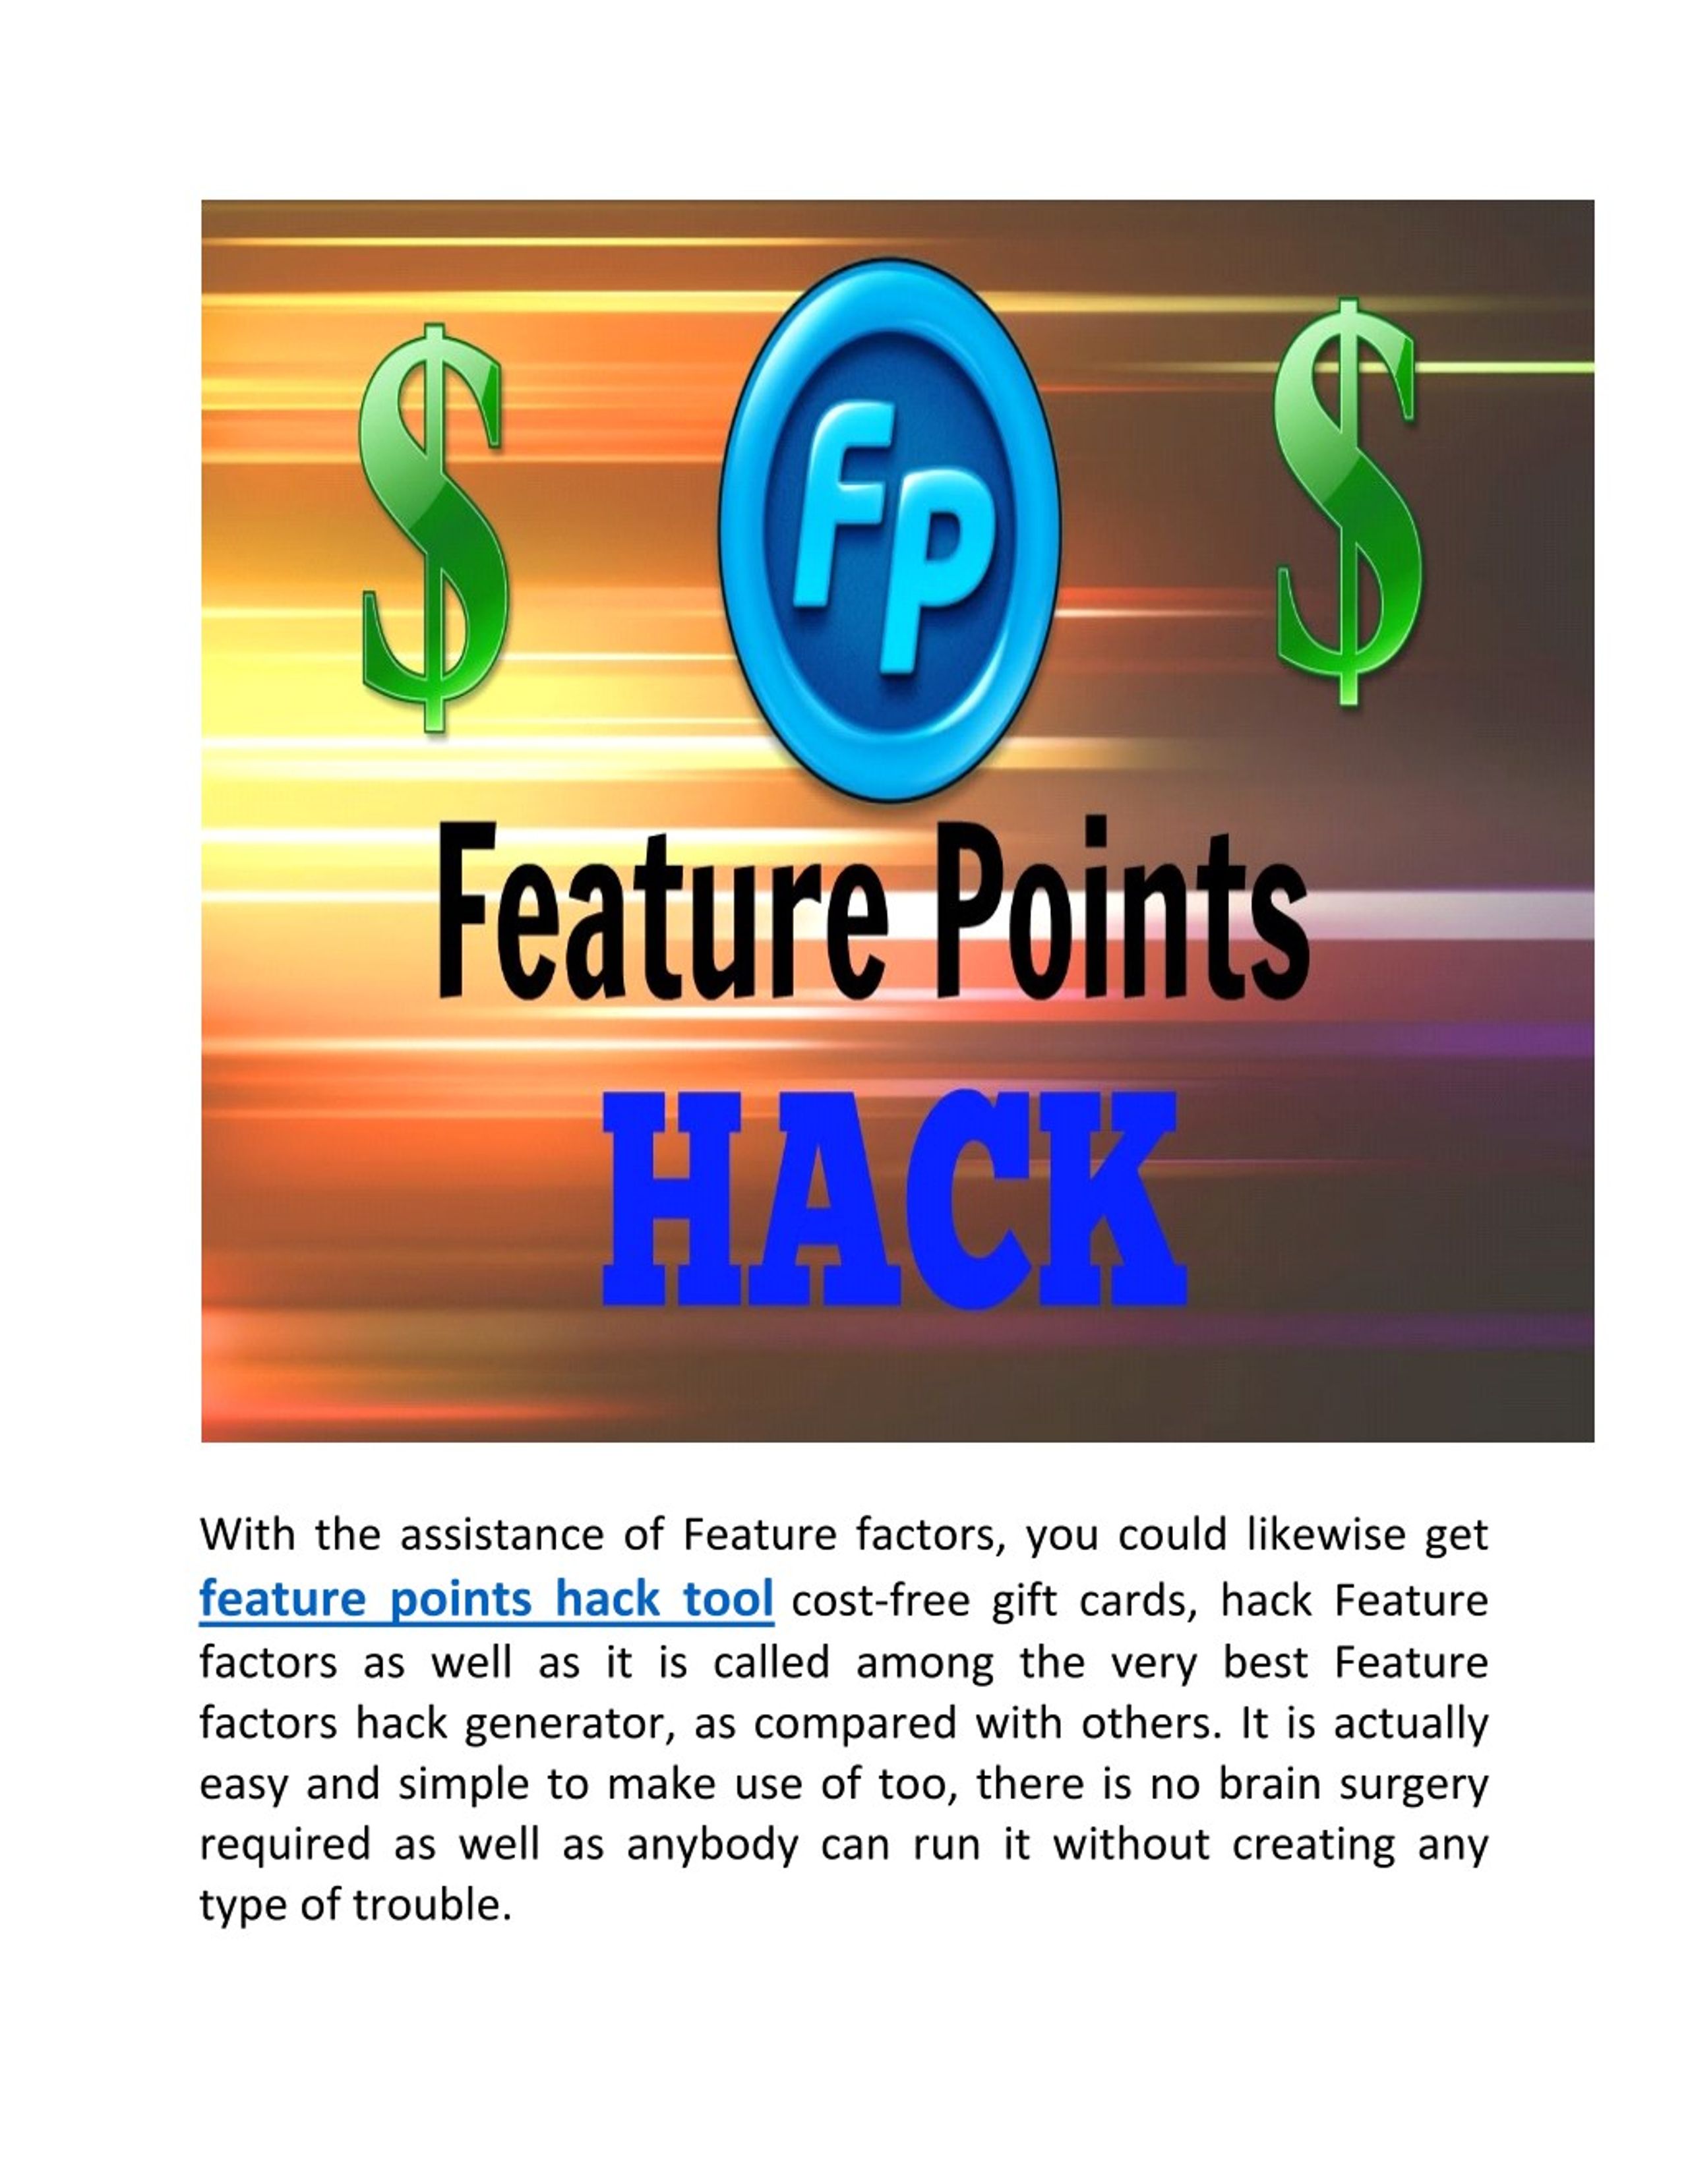 Ppt Why Are Hack Generators Crucial Fast Powerpoint - photon roblox exploit roblox code generator script